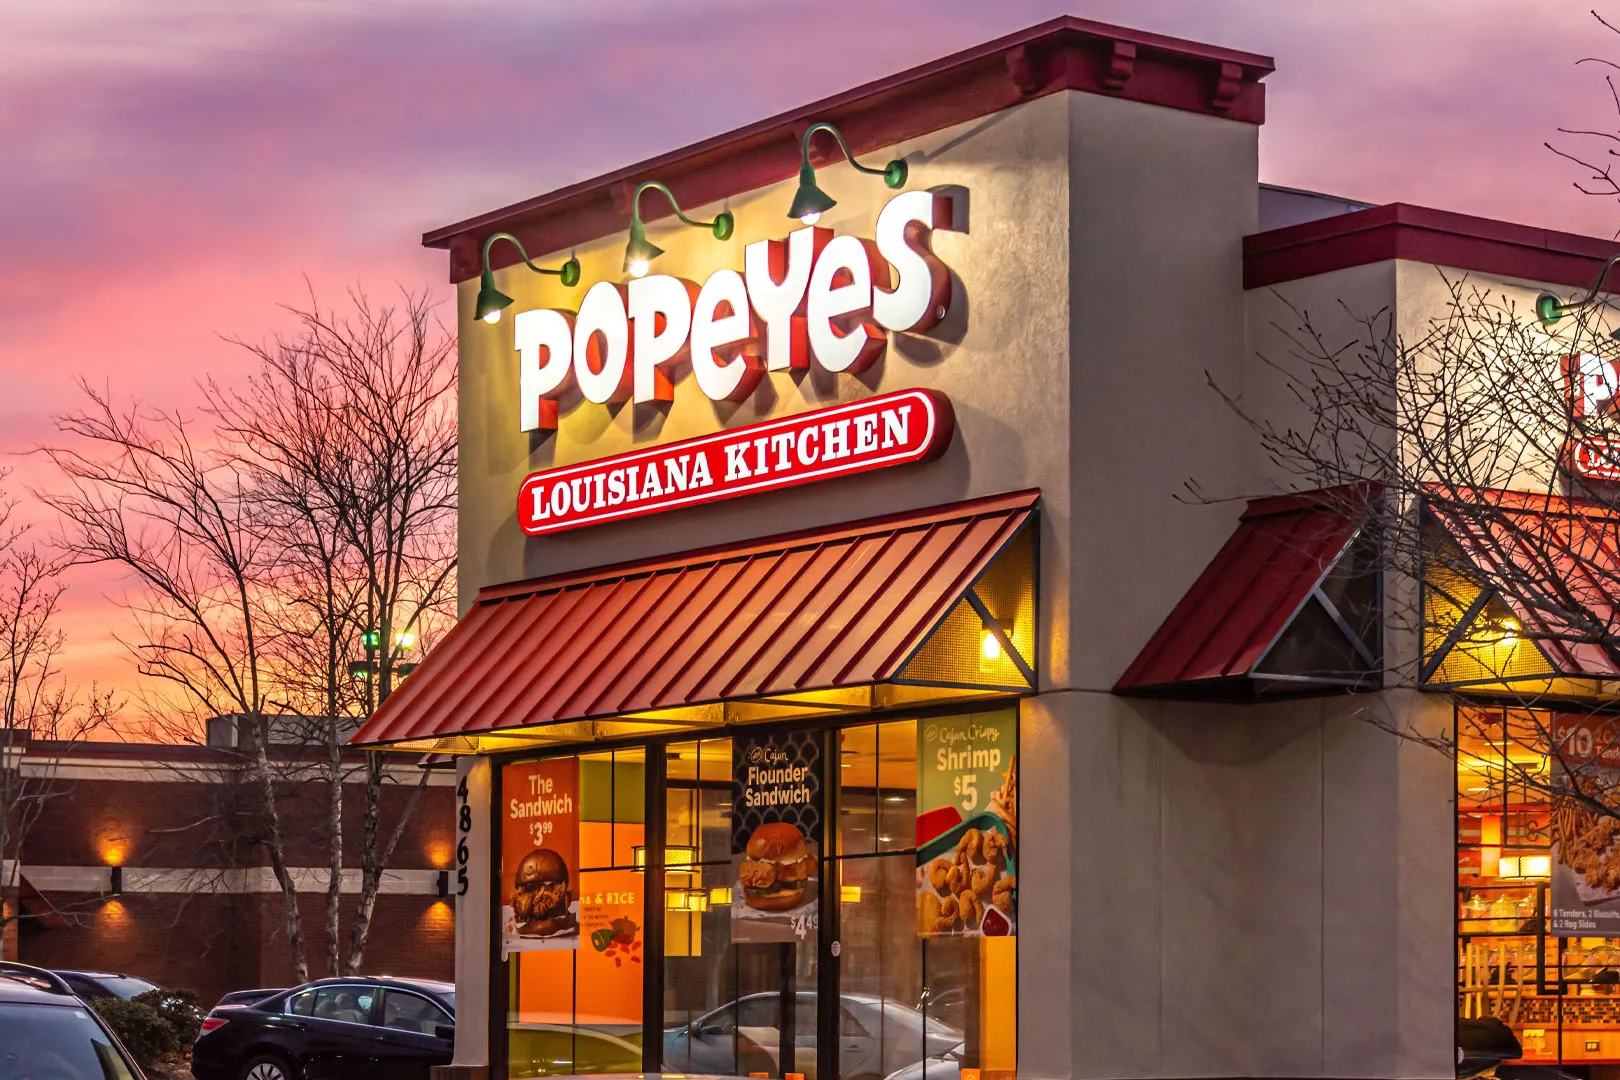 How to Find Popeyes Hours